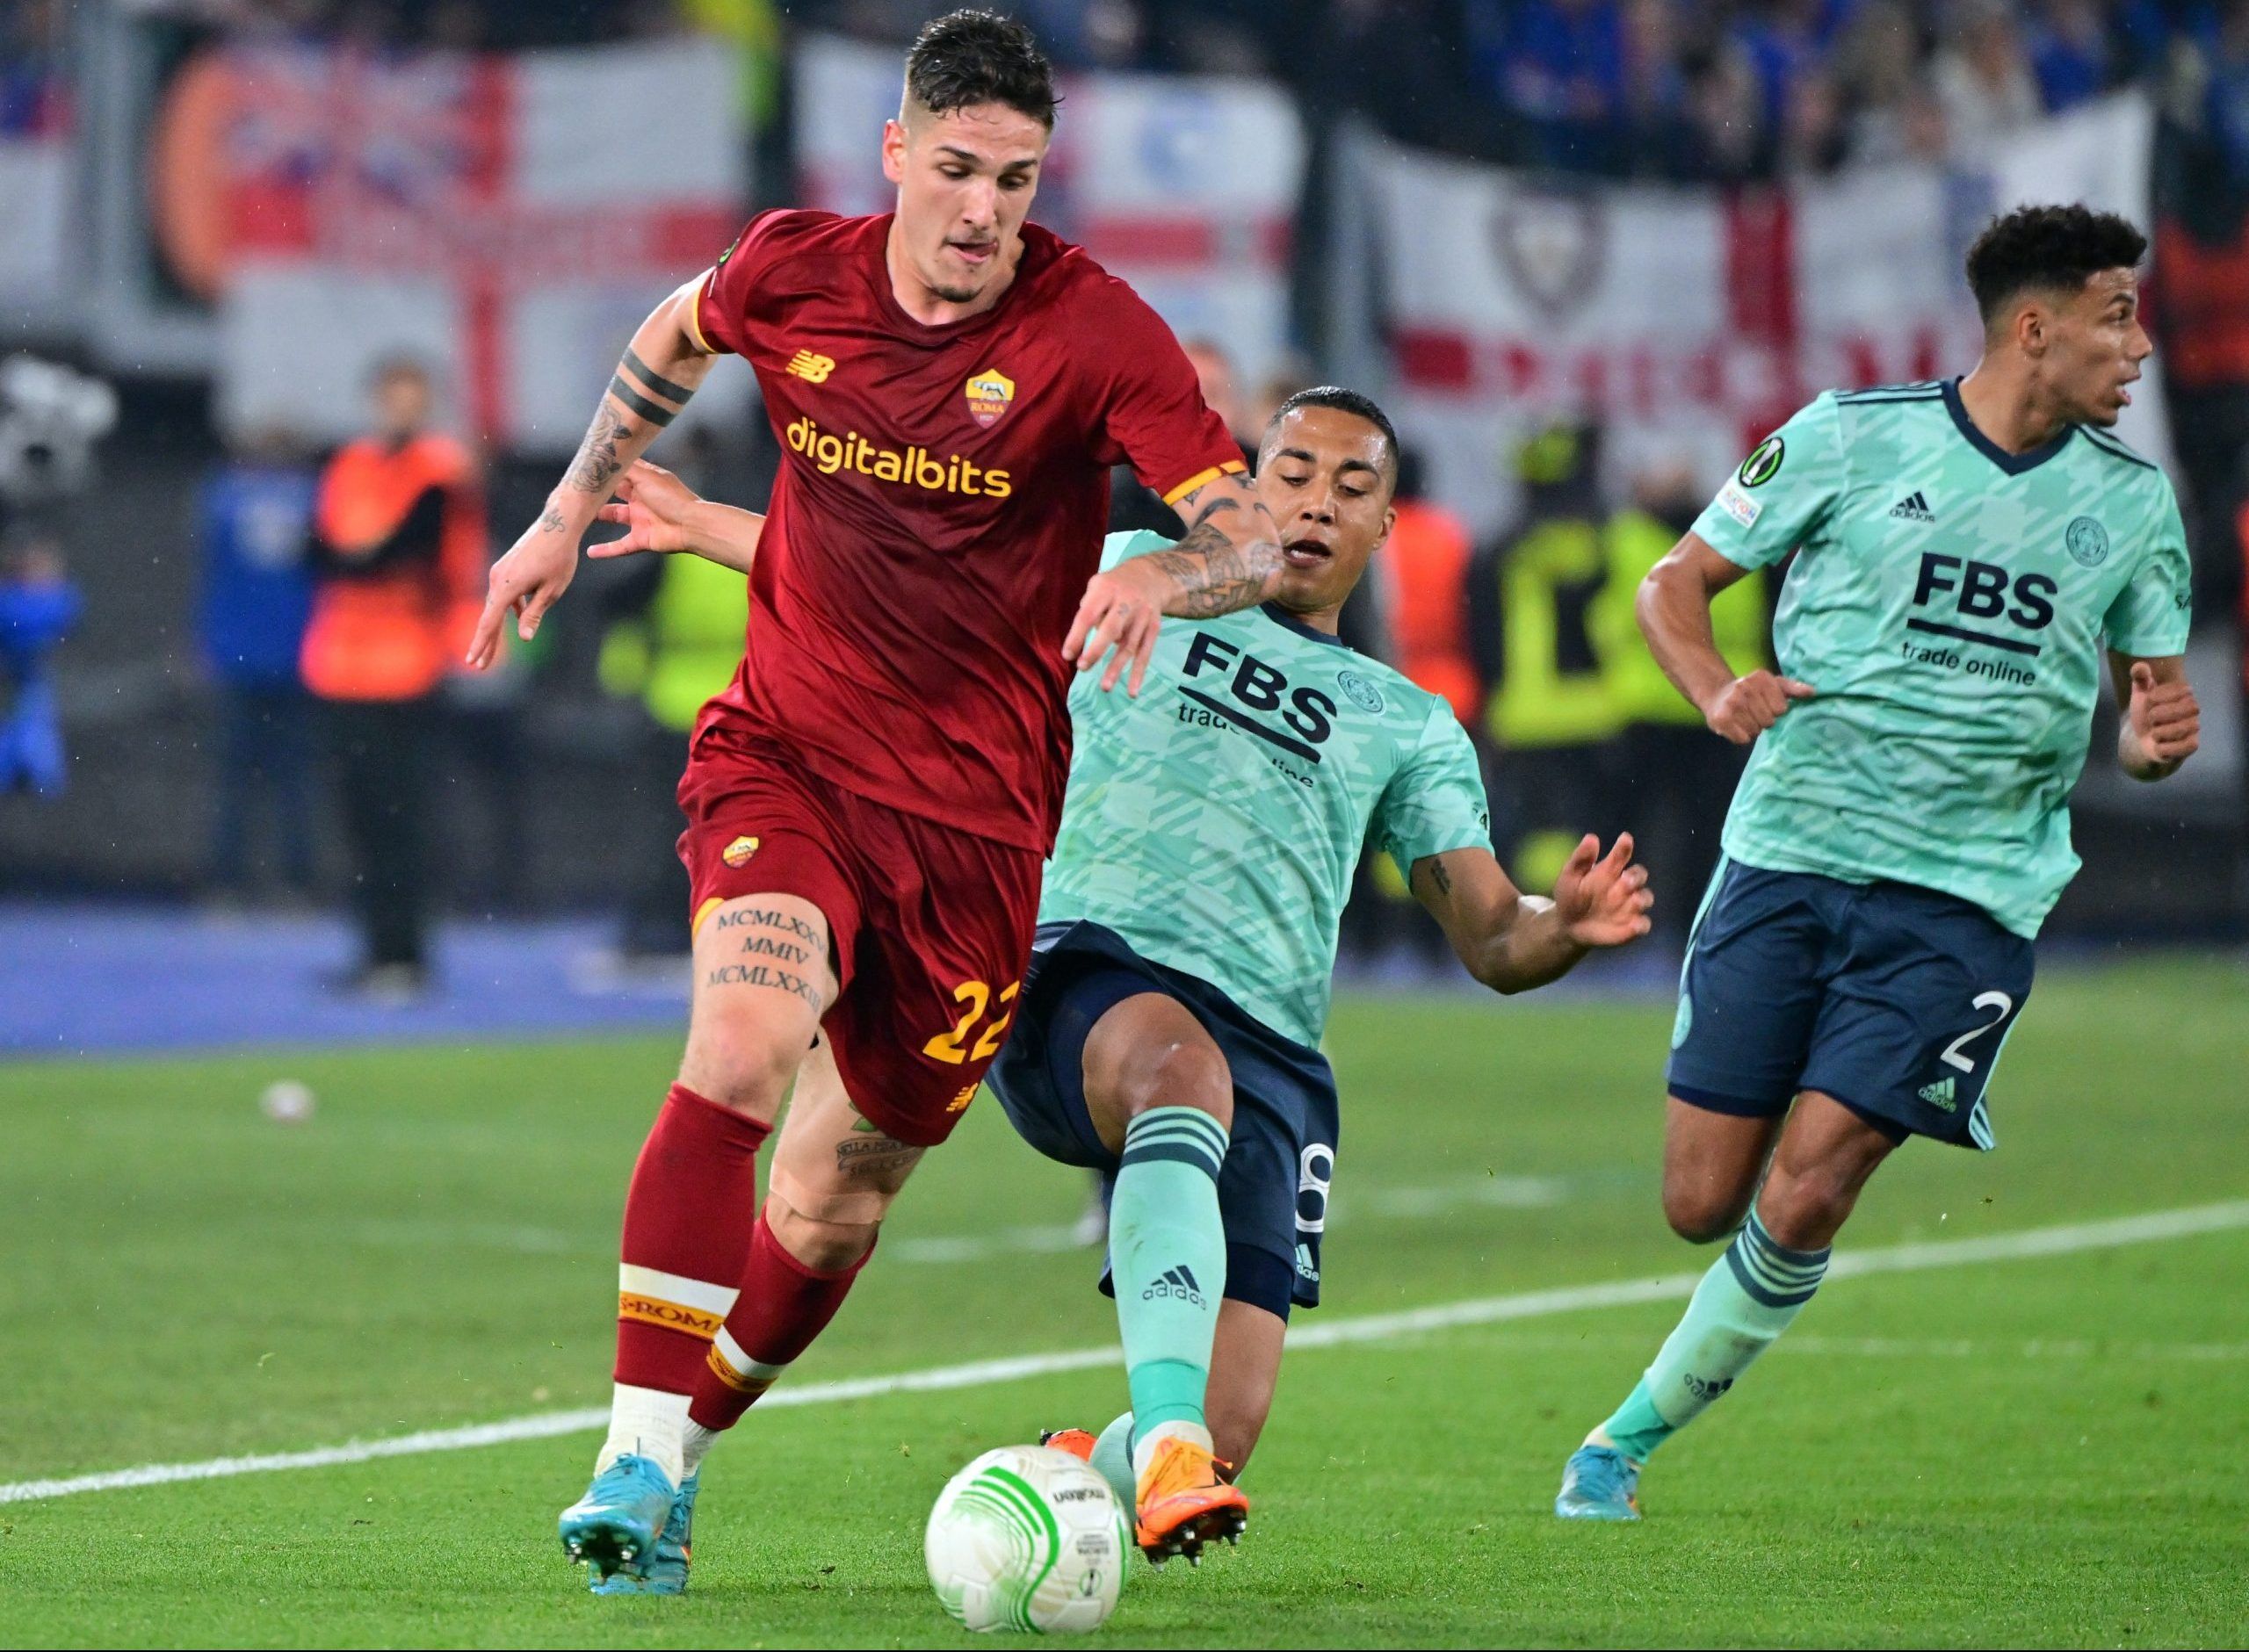 Soccer Football - Europa Conference League - Semi Final - Second Leg - AS Roma v Leicester City - Stadio Olimpico, Rome, Italy - May 5, 2022 AS Roma's Nicolo Zaniolo in action with Leicester City's Youri Tielemans REUTERS/Alberto Lingria